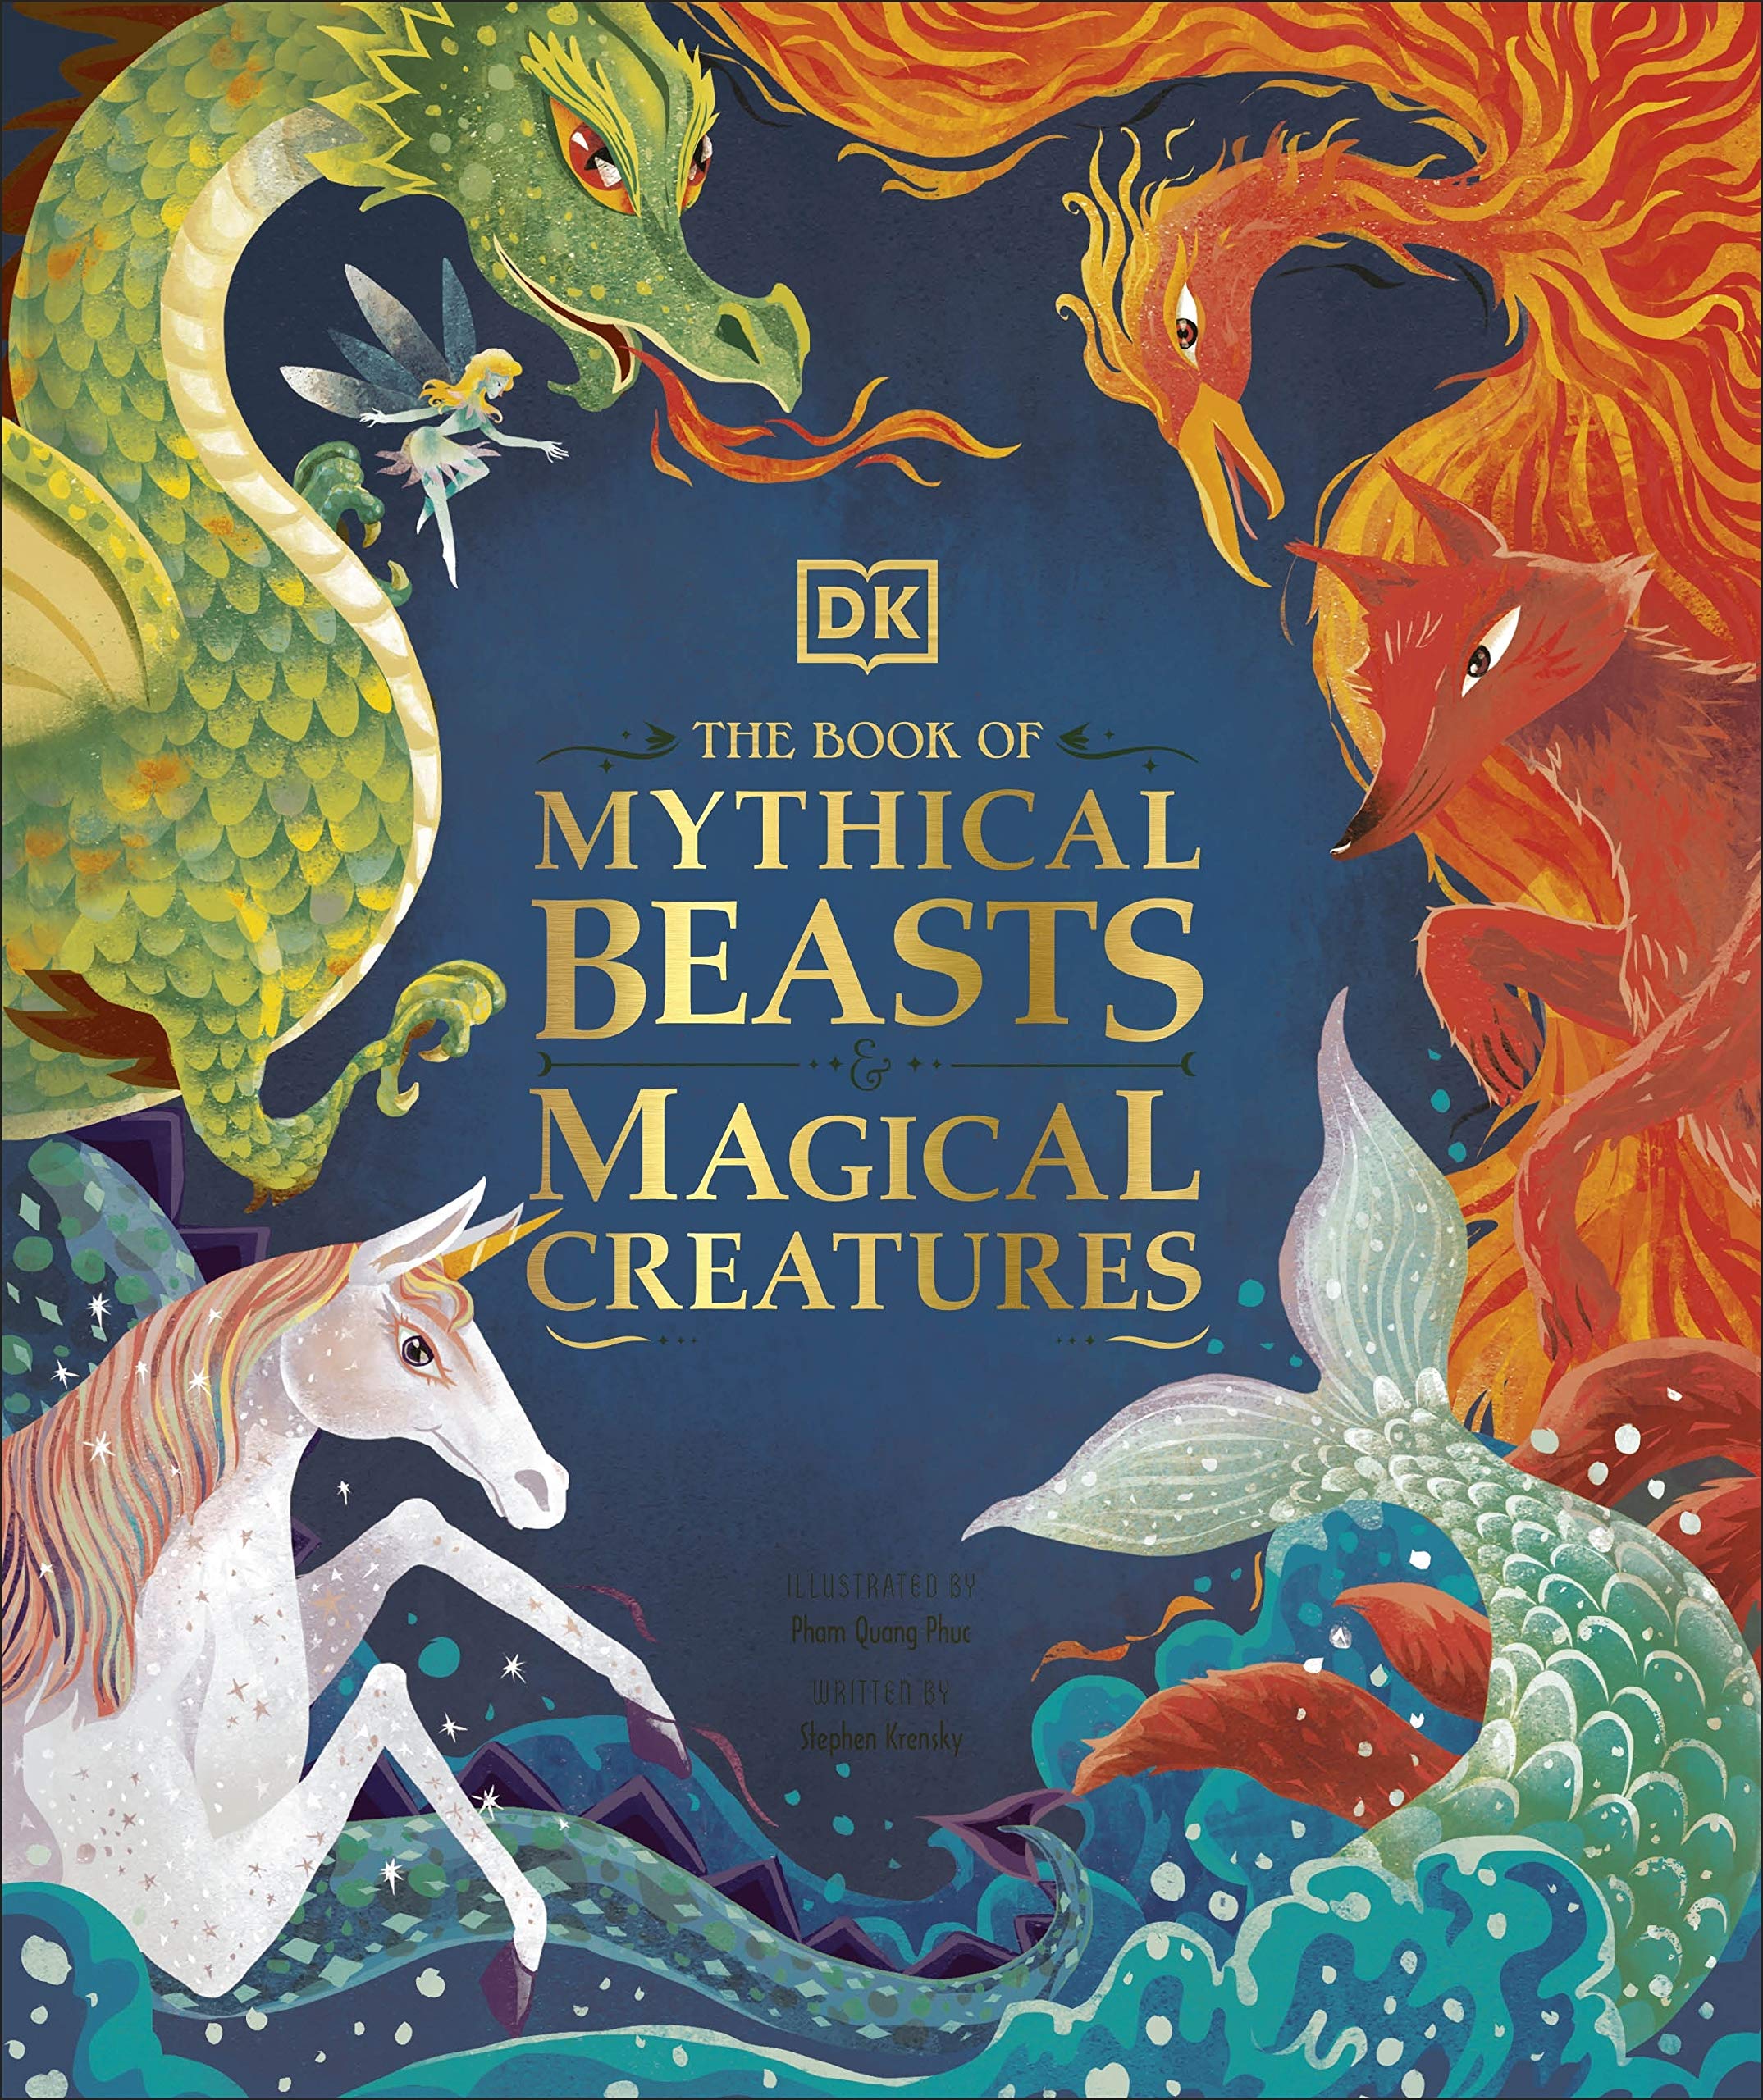 Mythical Beasts and Magical Creatures | DK